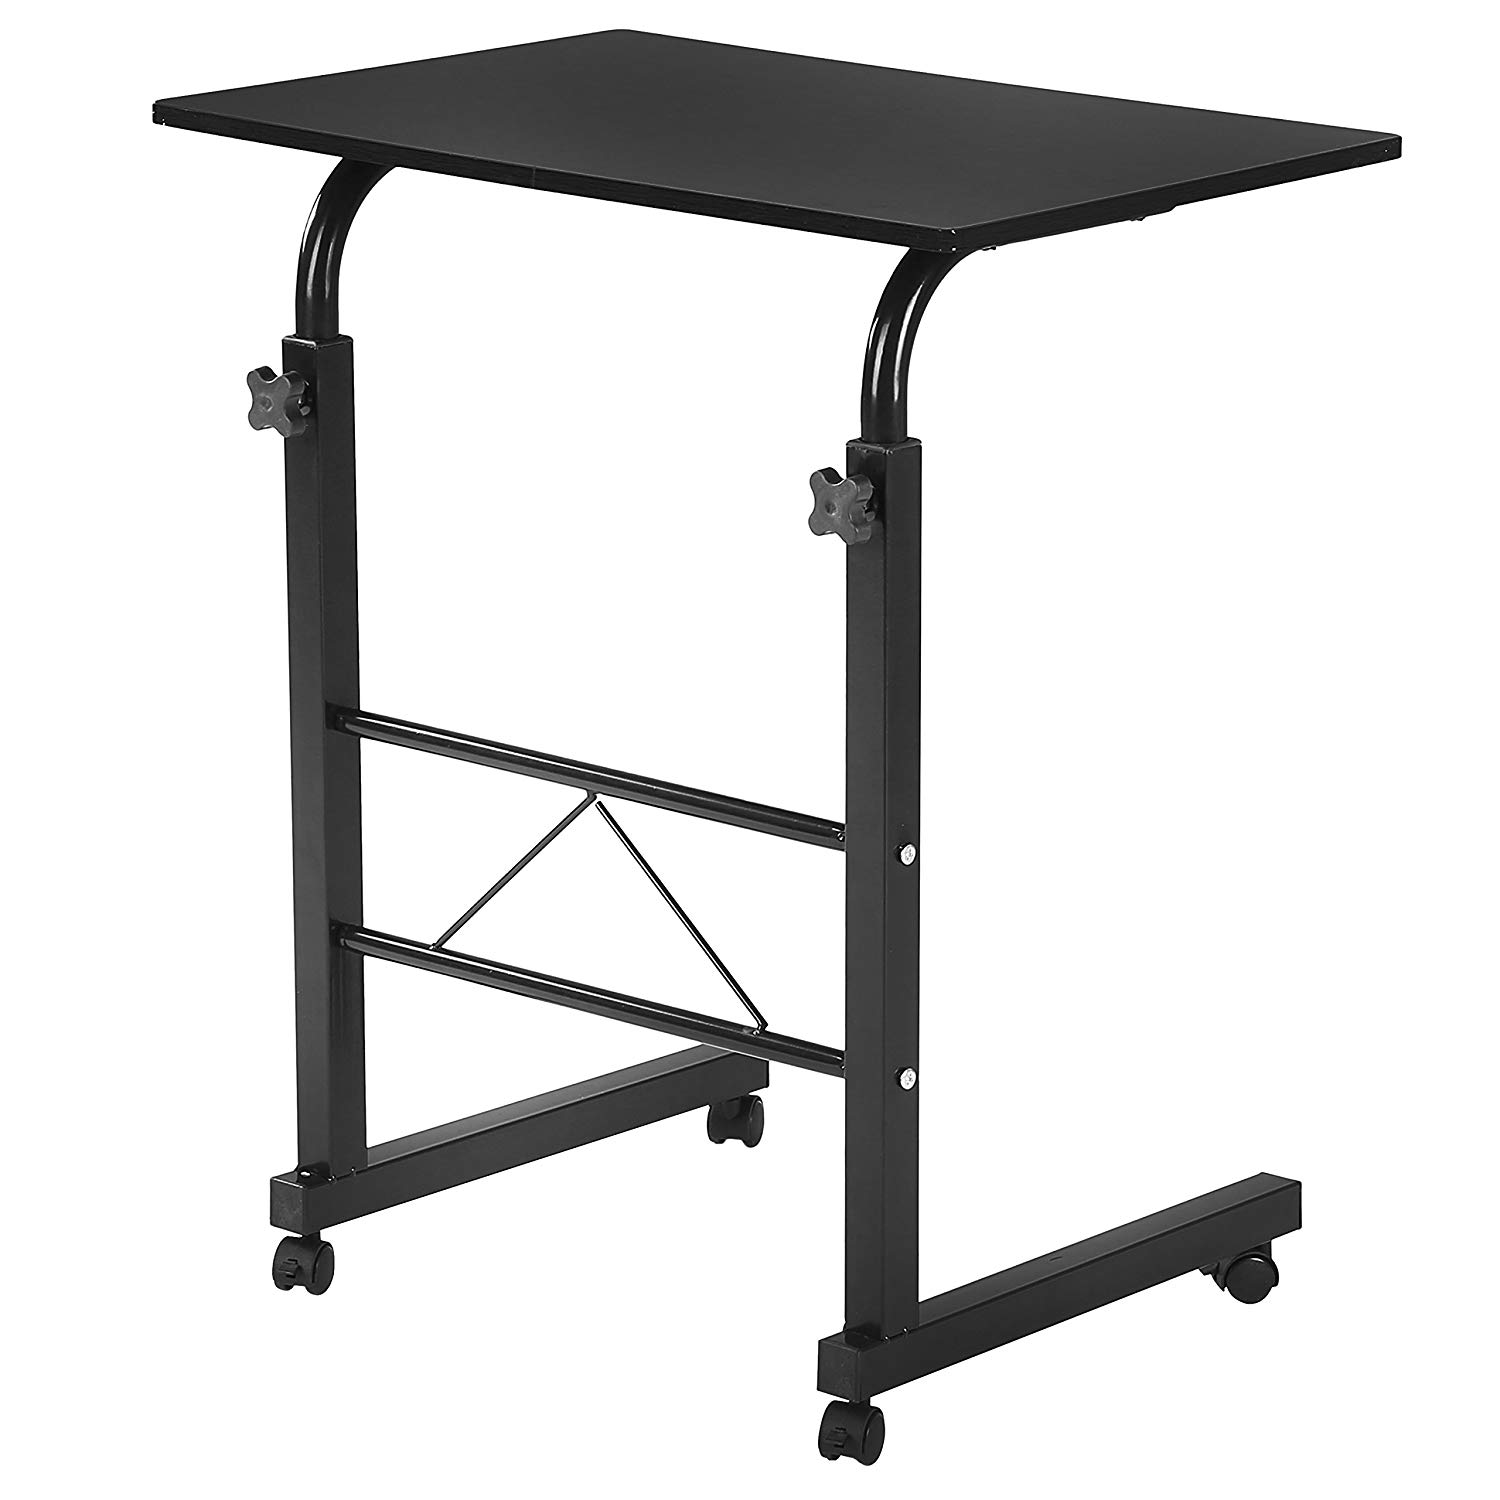 Winado Side Table Adjustable Height Laptop Table Stand Rolling Computer Desk Study Workstation PC Tray for Sofa & Bed in Home Office,Black - image 2 of 3